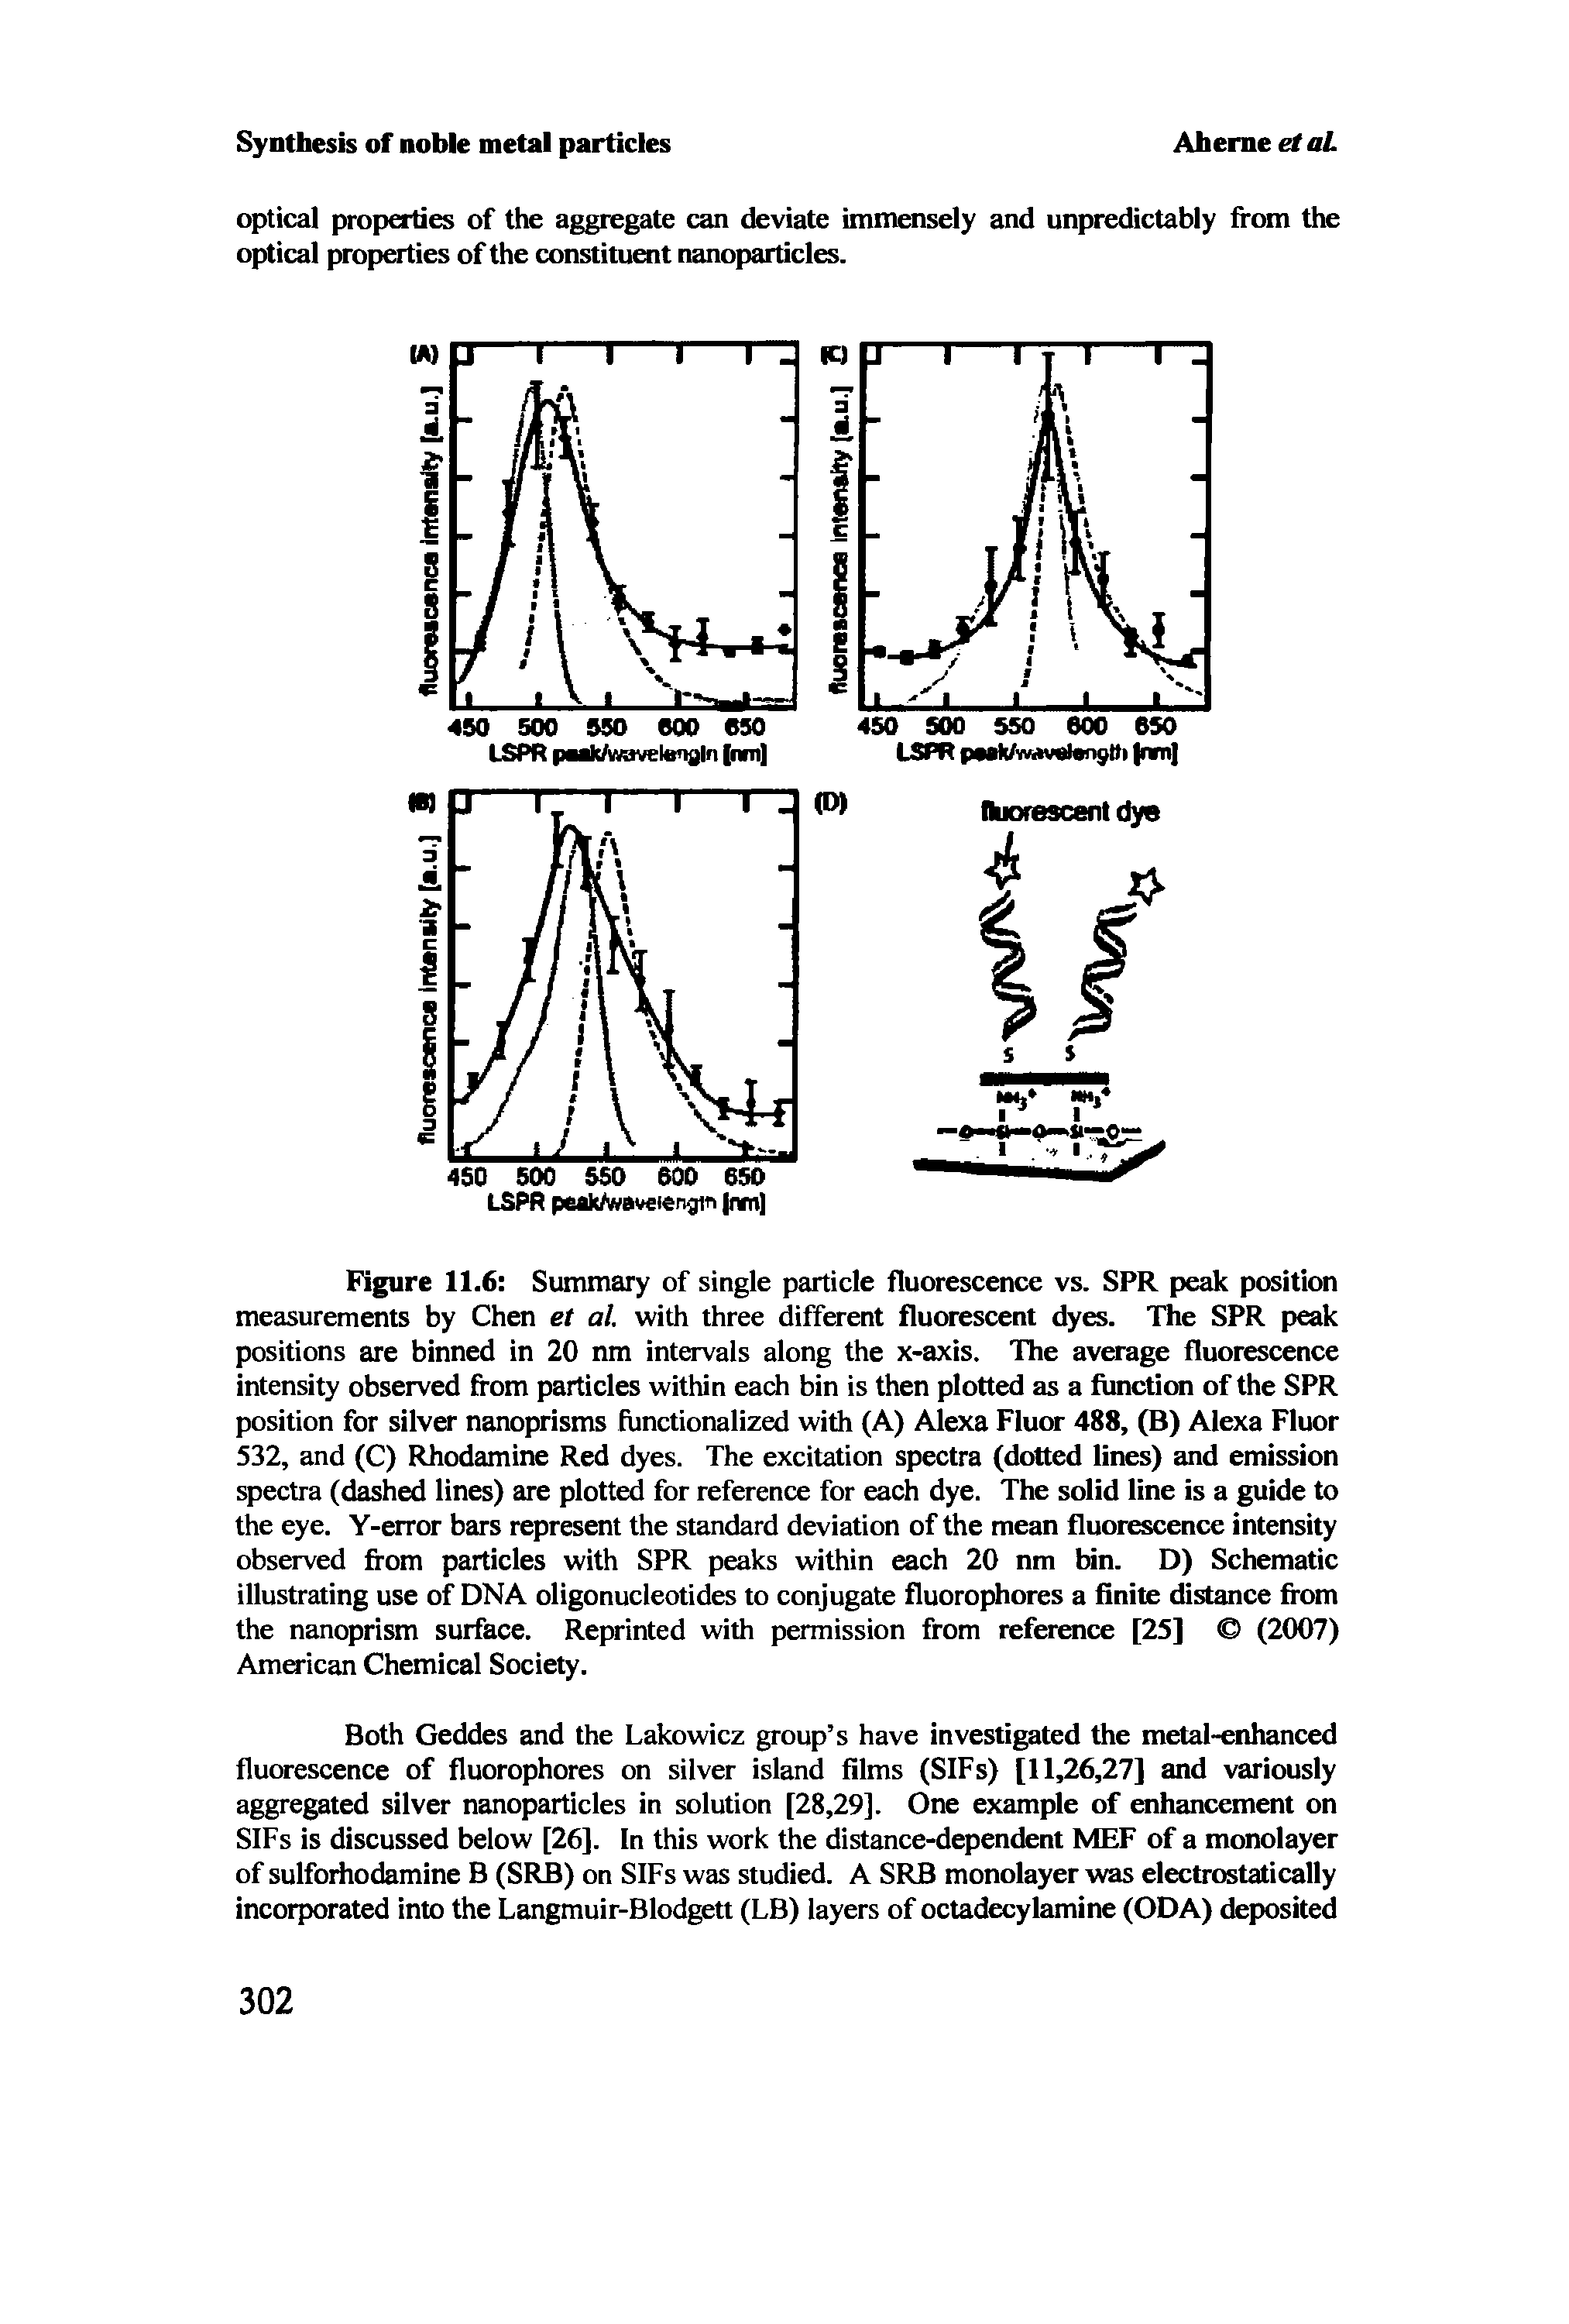 Figure 11.6 Summary of single particle fluorescence vs. SPR peak position measurements by Chen et al. with three different fluorescent dyes. The SPR peak positions are binned in 20 nm intervals along the x-axis. The average fluorescence intensity observed from particles within each bin is then plotted as a fimction of the SPR position for silver nanoprisms functionalized with (A) Alexa Fluor 488, (B) Alexa Fluor 532, and (C) Rhodamine Red dyes. The excitation spectra (dotted lines) and emission spectra (dashed lines) are plotted for reference for each dye. The solid line is a guide to the eye. Y-error bars represent the standard deviation of the mean fluorescence intensity observed from particles with SPR peaks within each 20 nm bin. D) Schematic illustrating use of DNA oligonucleotides to conjugate fluorophores a finite distance from the nanoprism surface. Reprinted with permission from reference [25] (2007)...